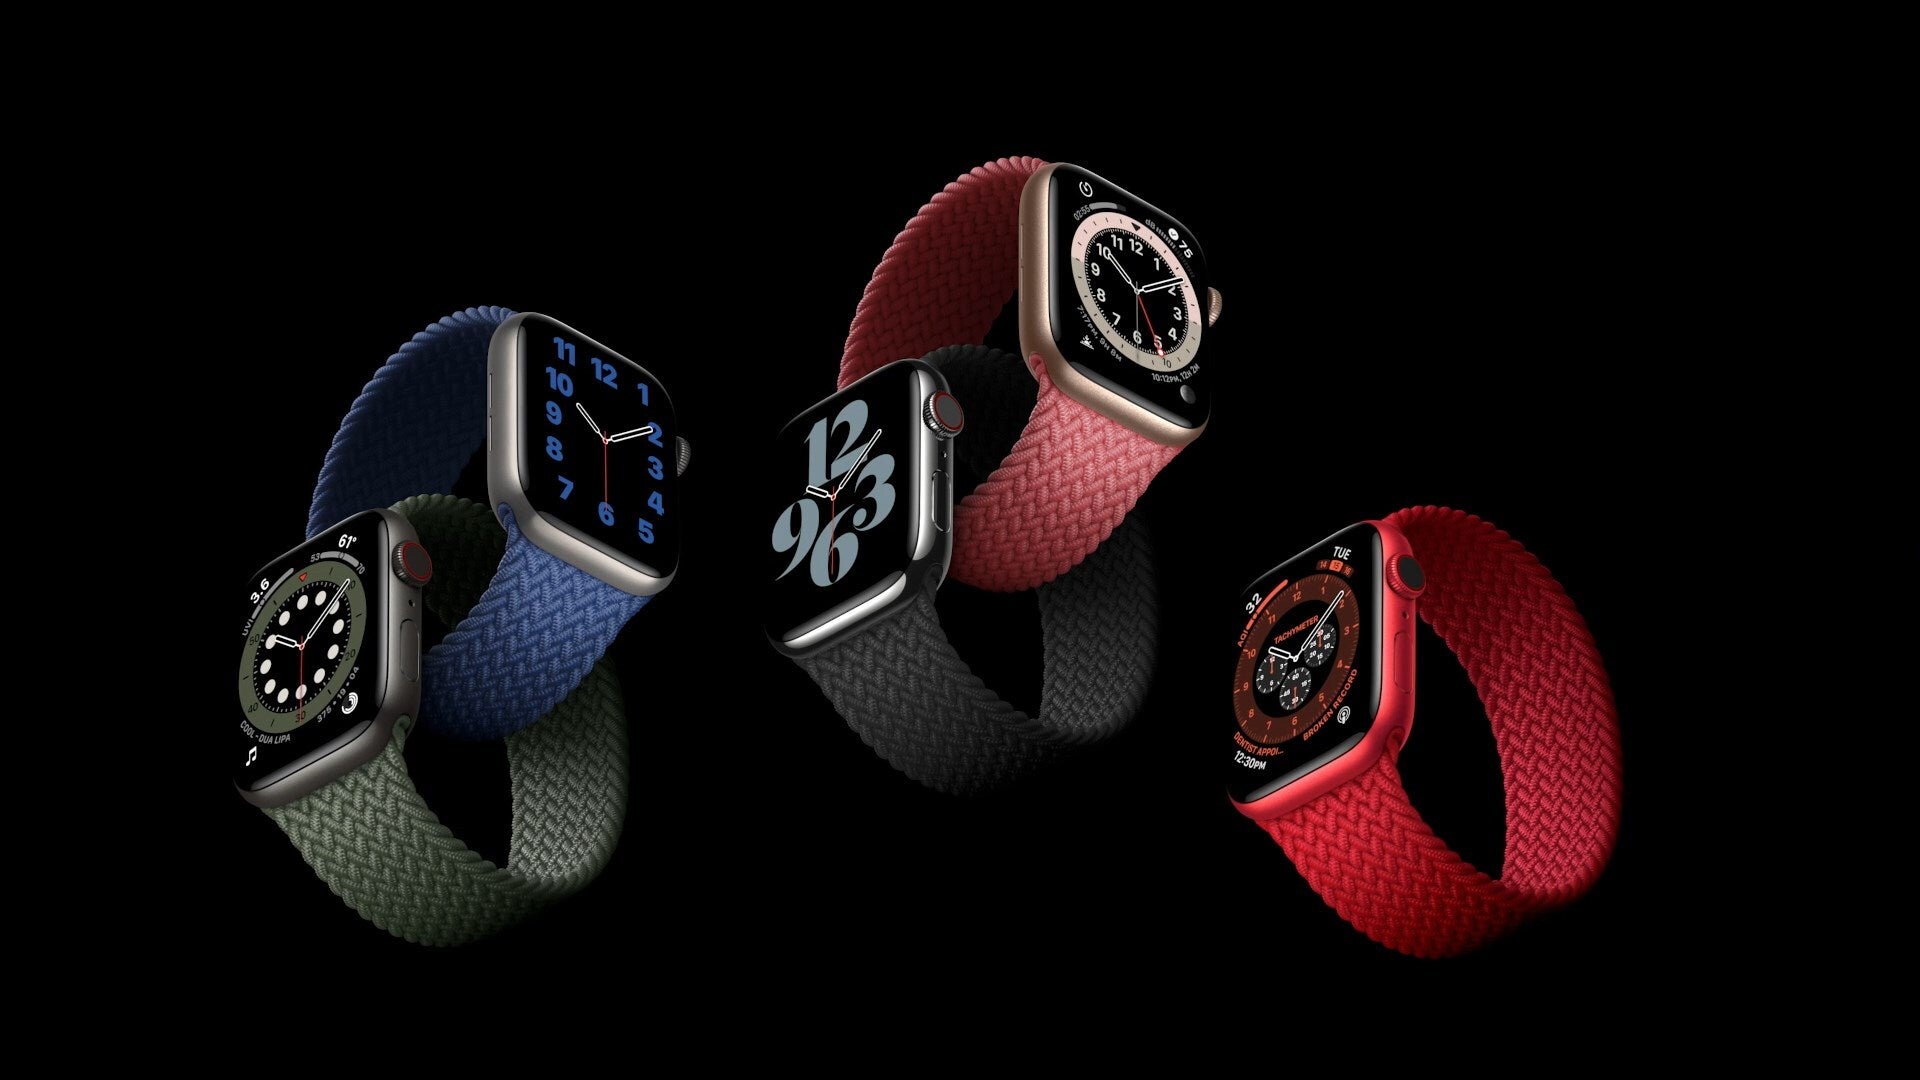 Apple Watch Series 6: 40mm vs 44mm, which Apple Watch Series 6 size is the best for you?